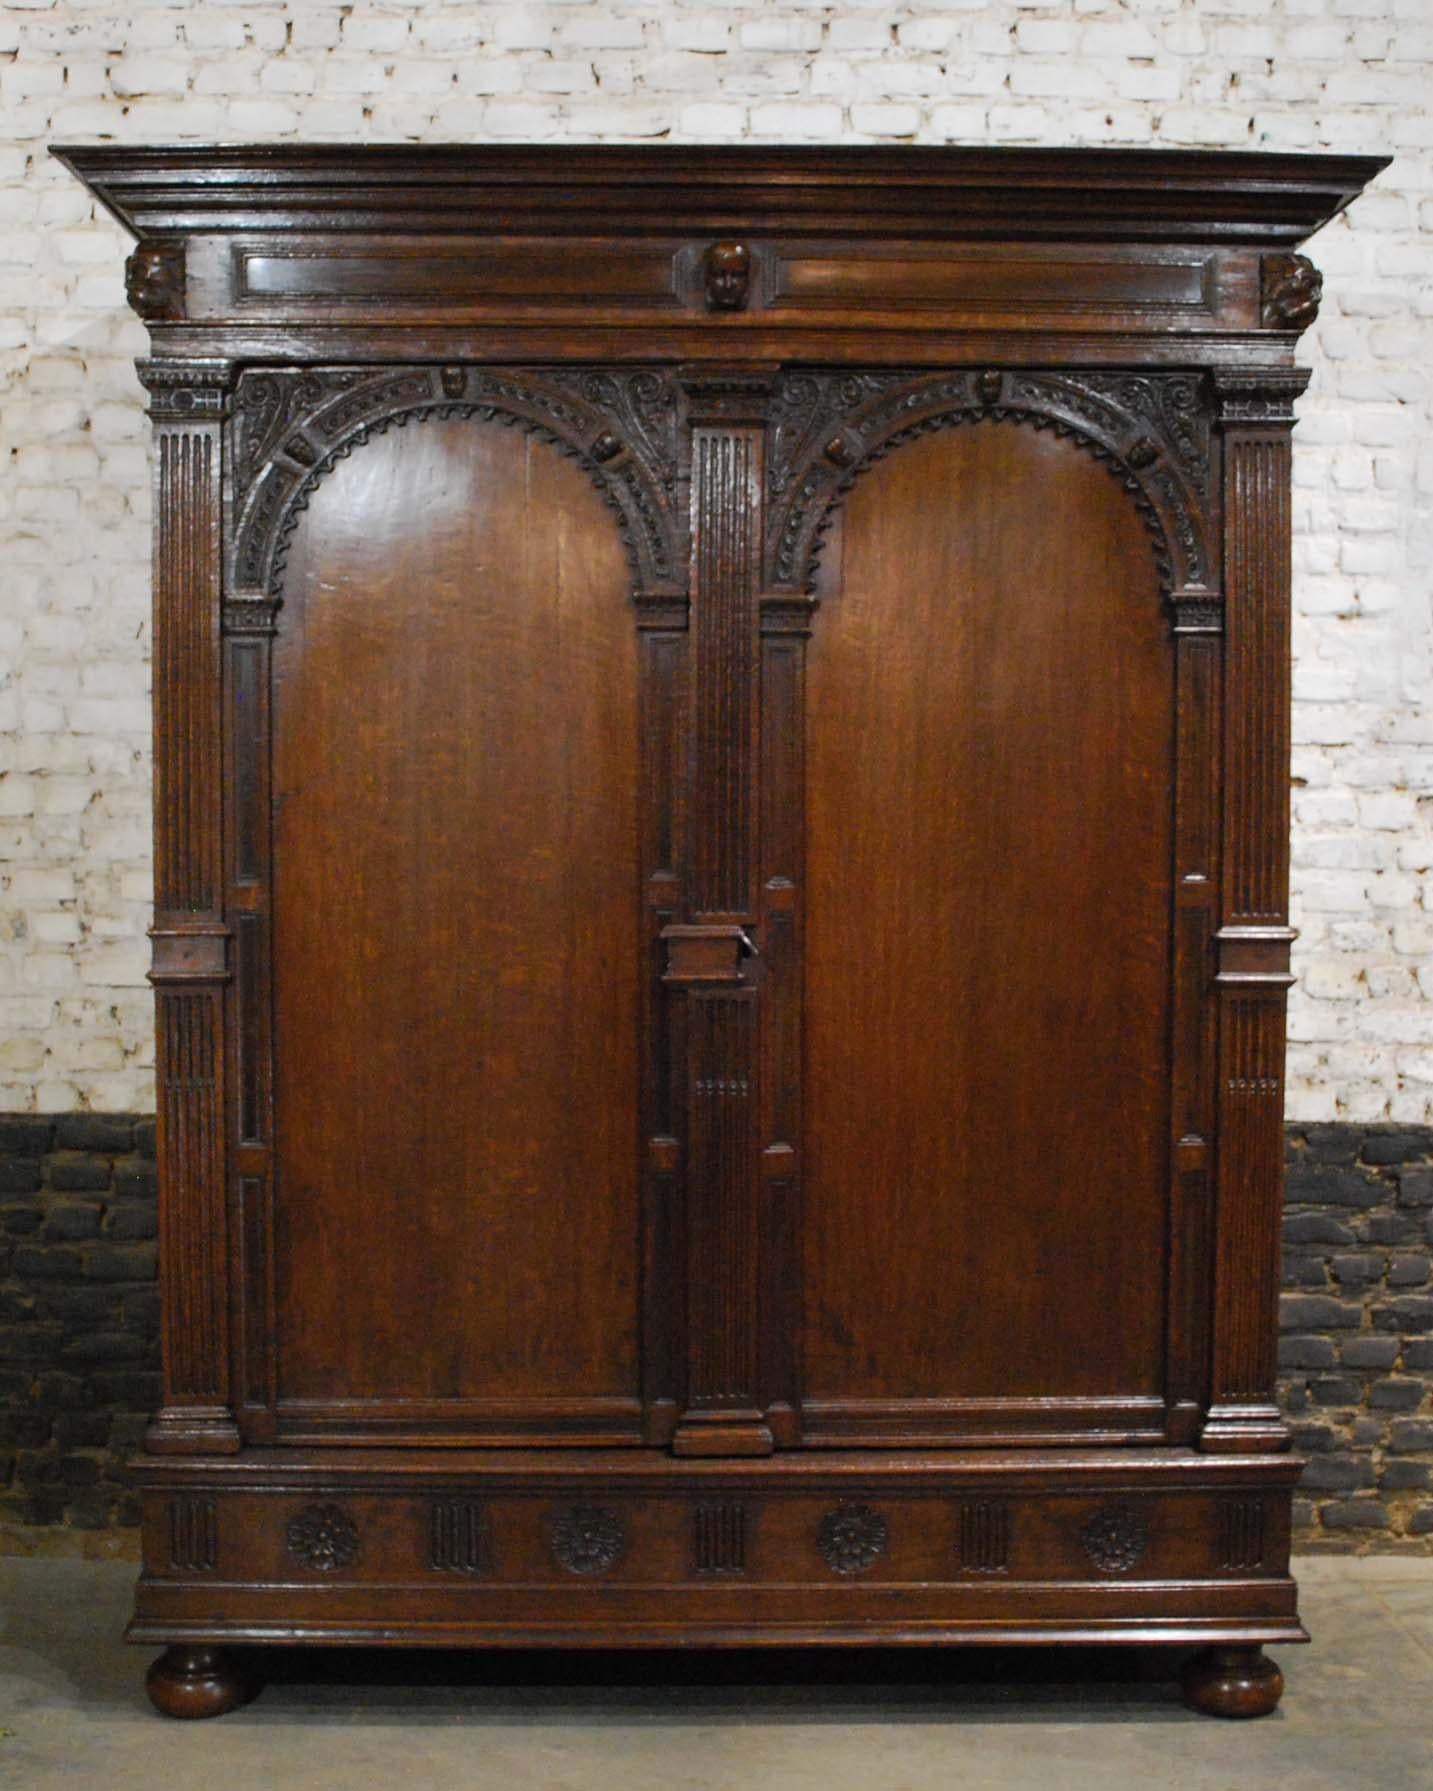 This rare Dutch cabinet is made of the finest oak in the tradition of the Dutch Renaissance during the “Dutch golden age” 
This cabinet is made in the Provence of Utrecht, circa 1730. The arched doors are typical for this province and this type of